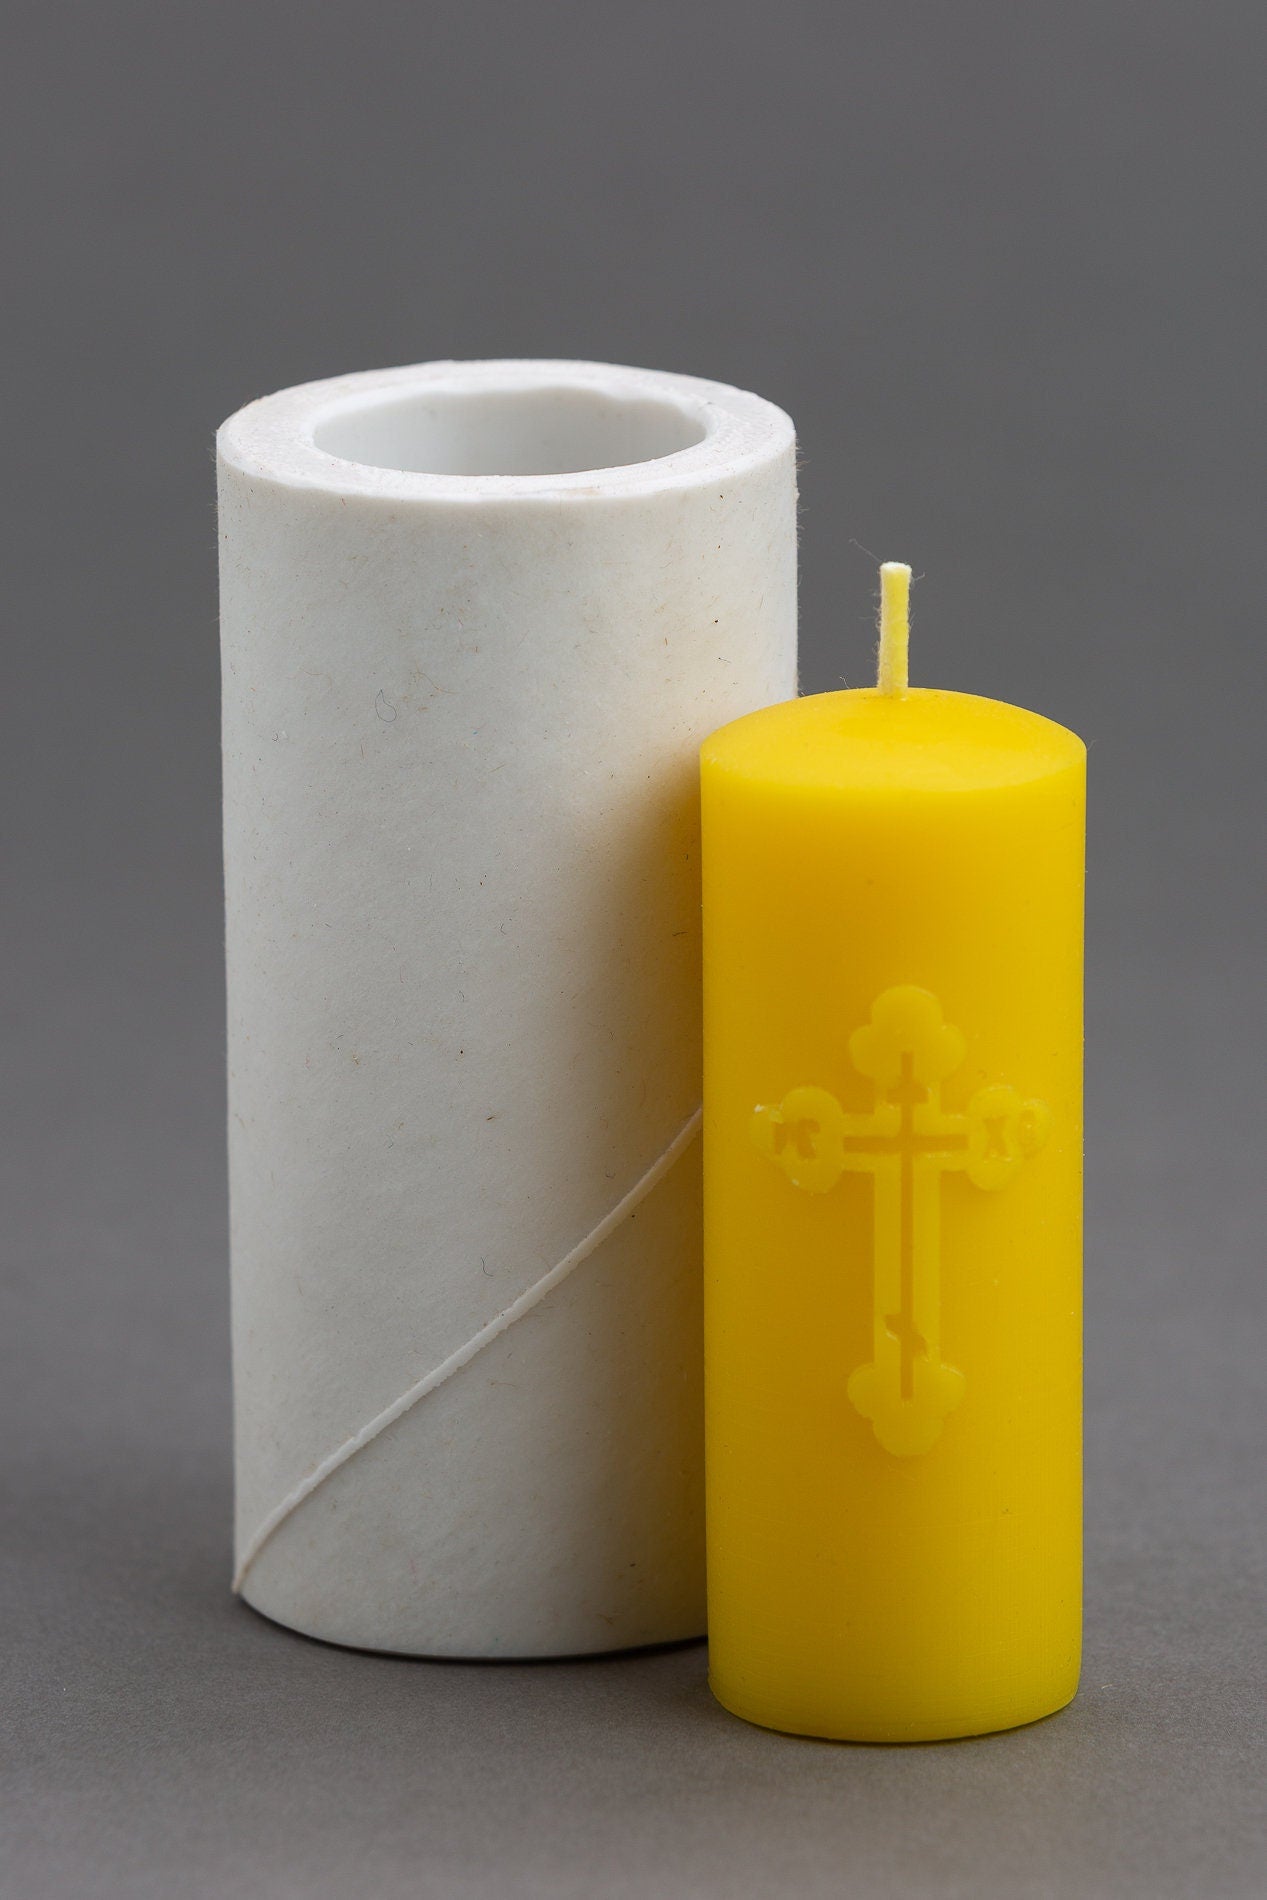 ORTHODOX CROSS Silicone Candle mould Mould is produced of high